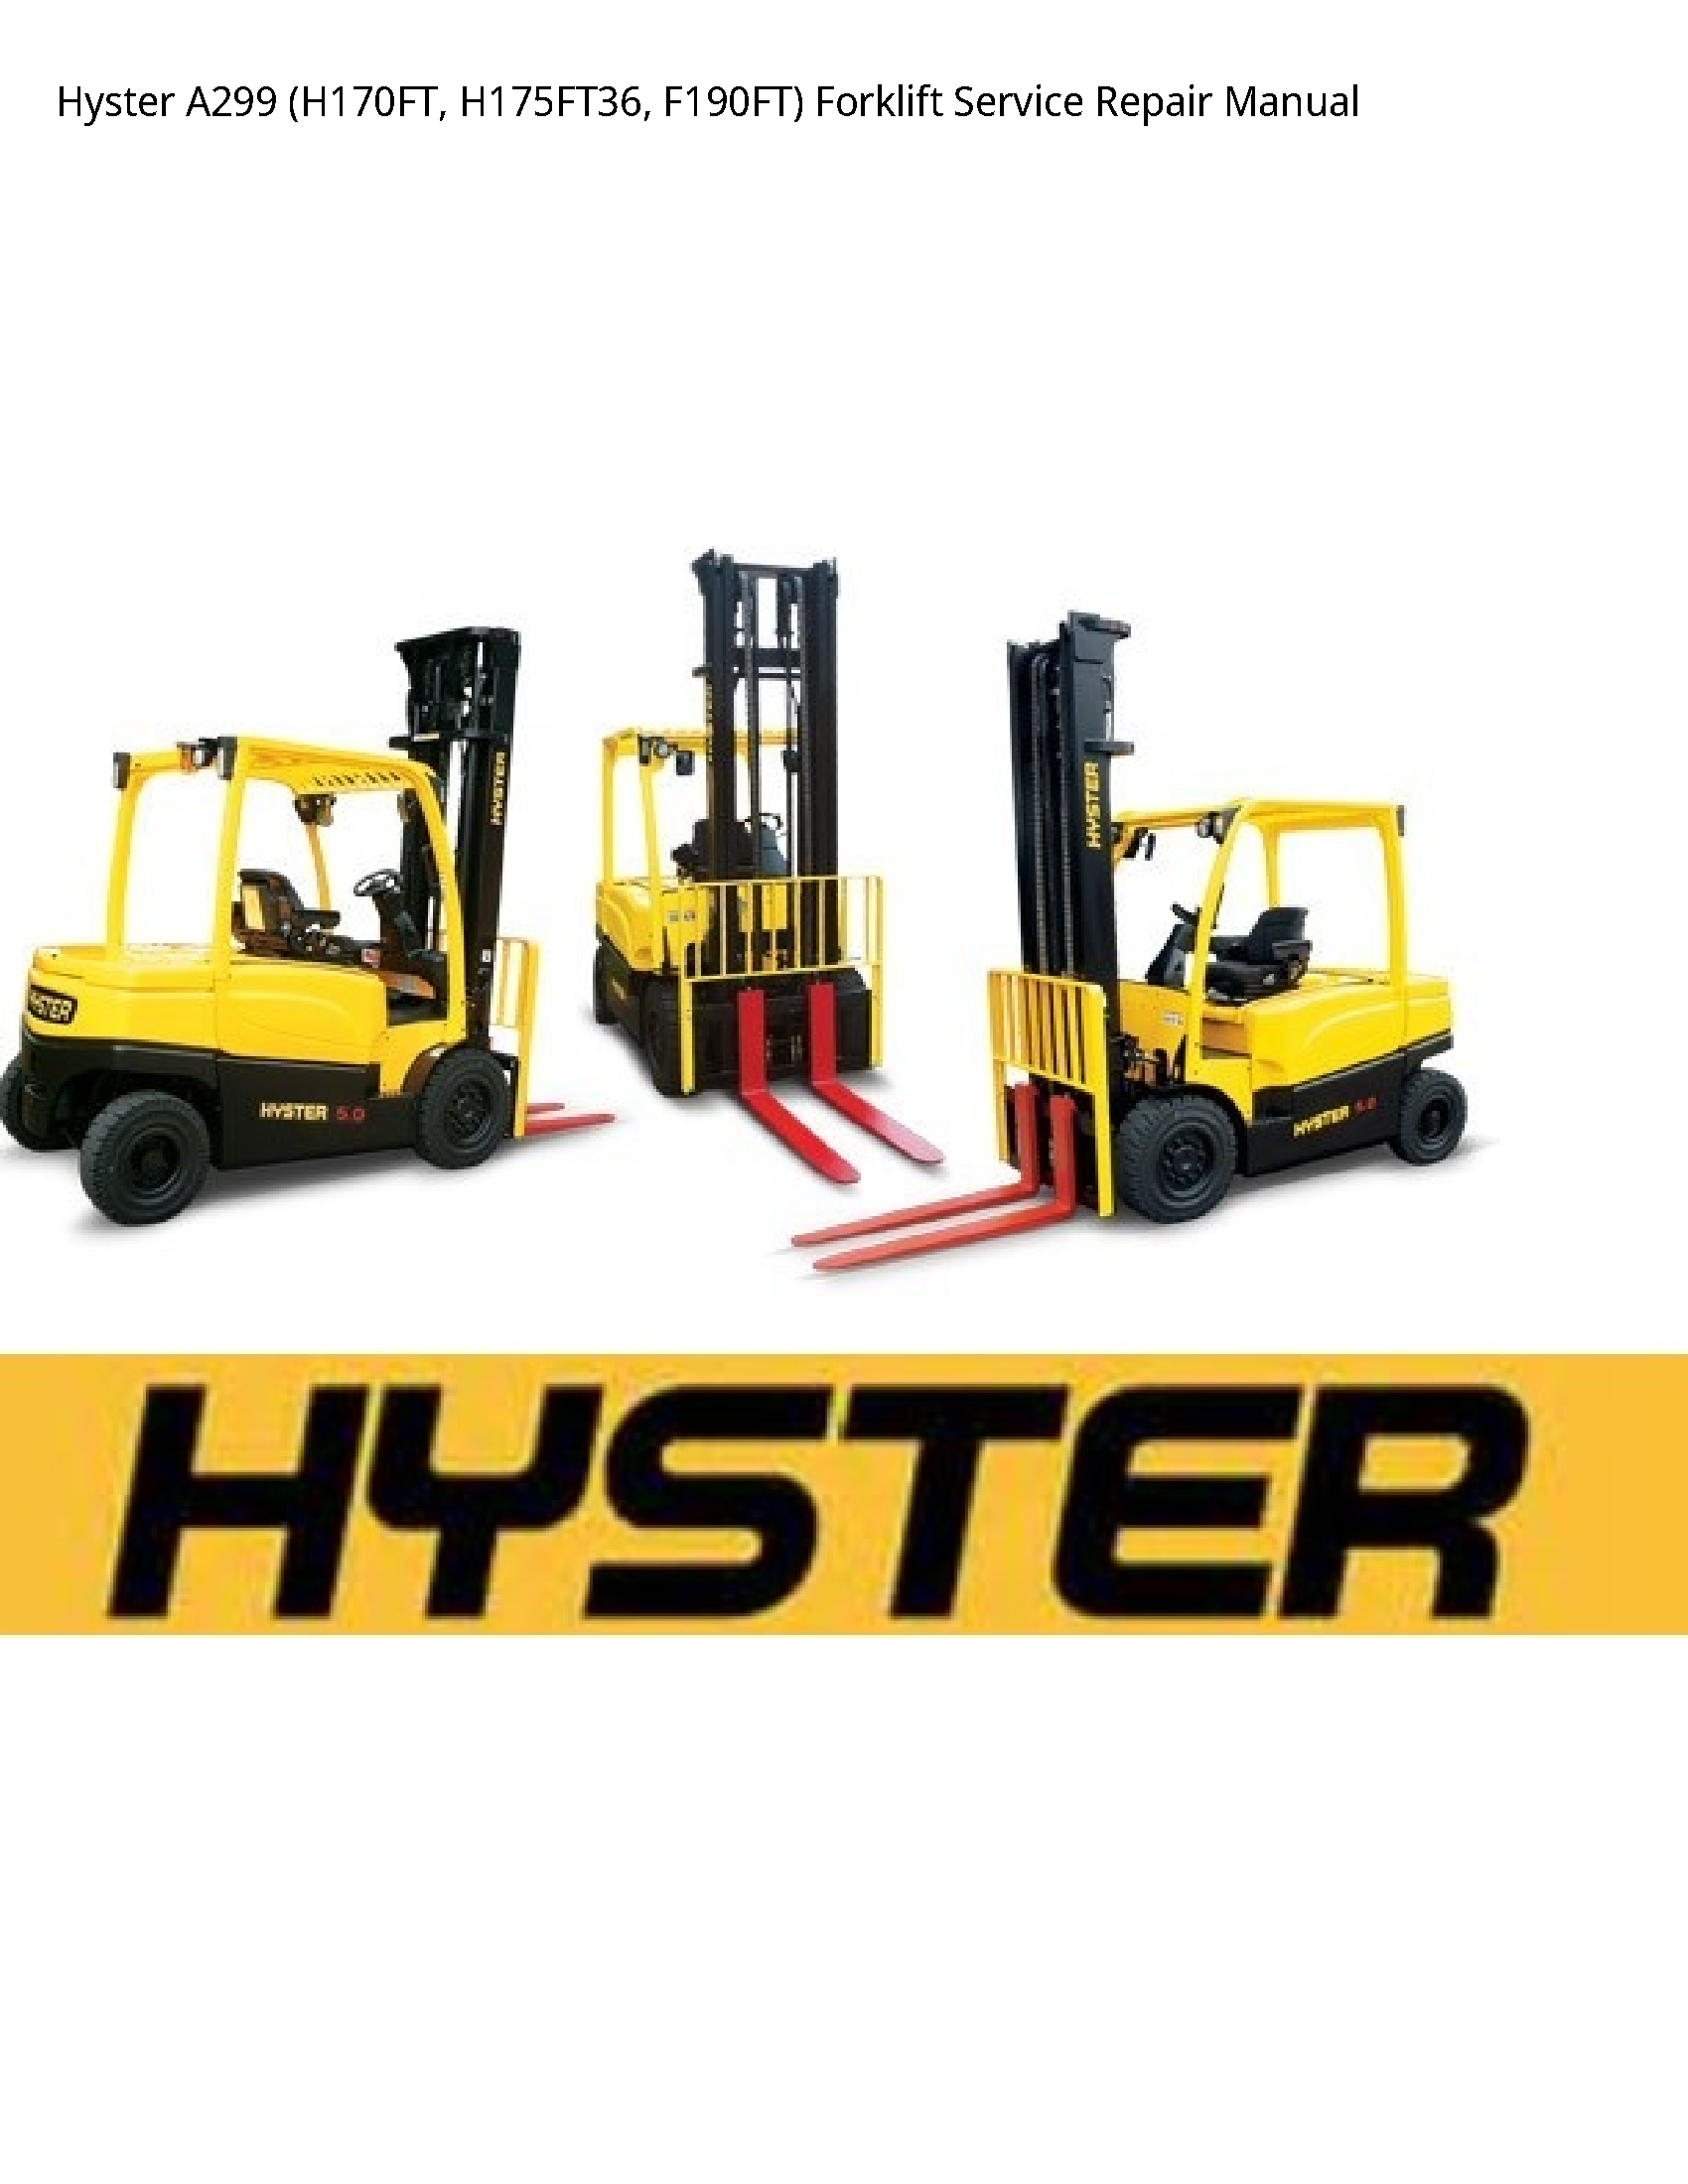 Hyster A299 Forklift manual